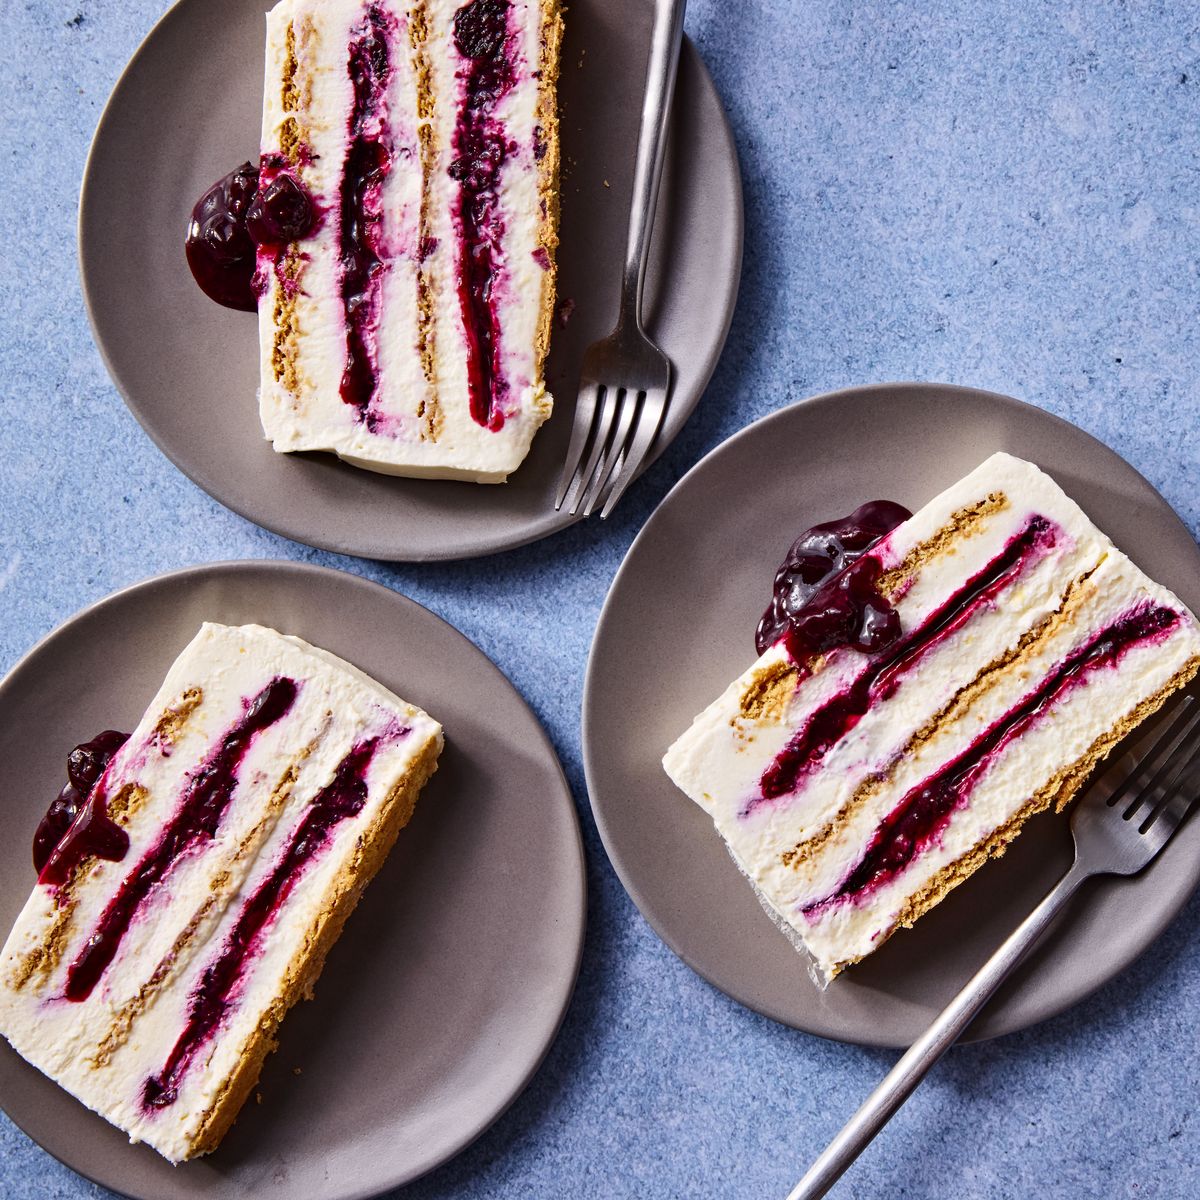 blueberry cheesecake icebox cake is our favorite no-fuss summer treat